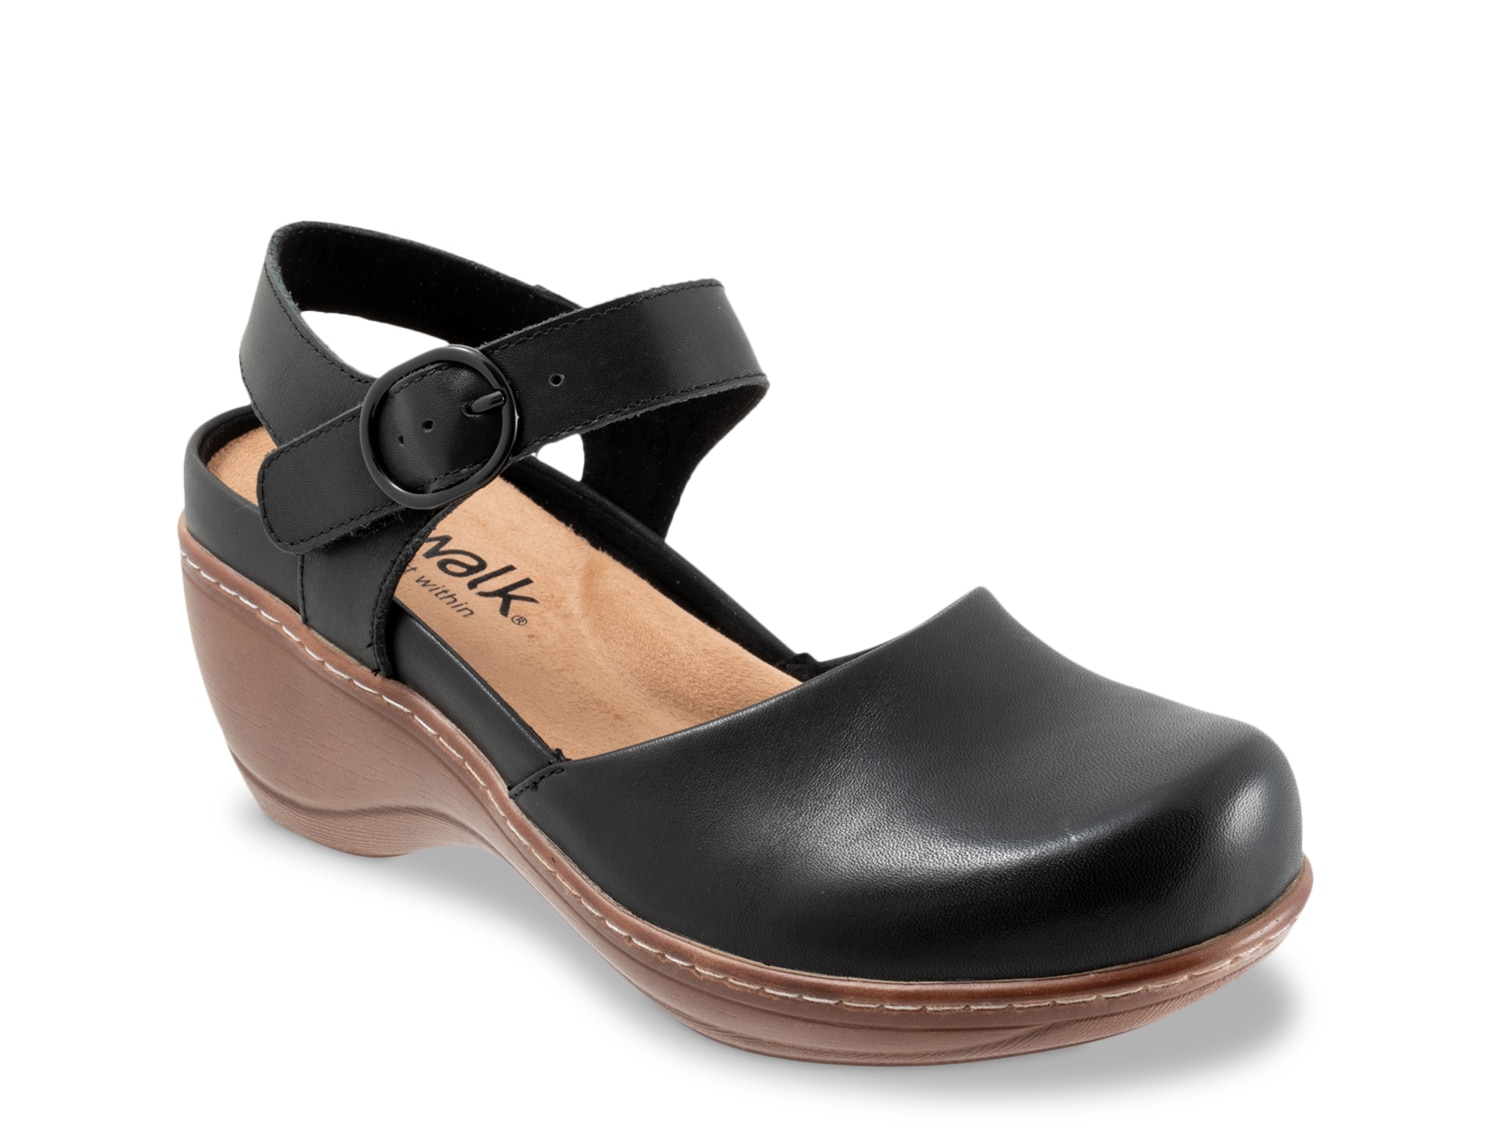 Softwalk Mabelle Wedge Sandal - Free Shipping | DSW